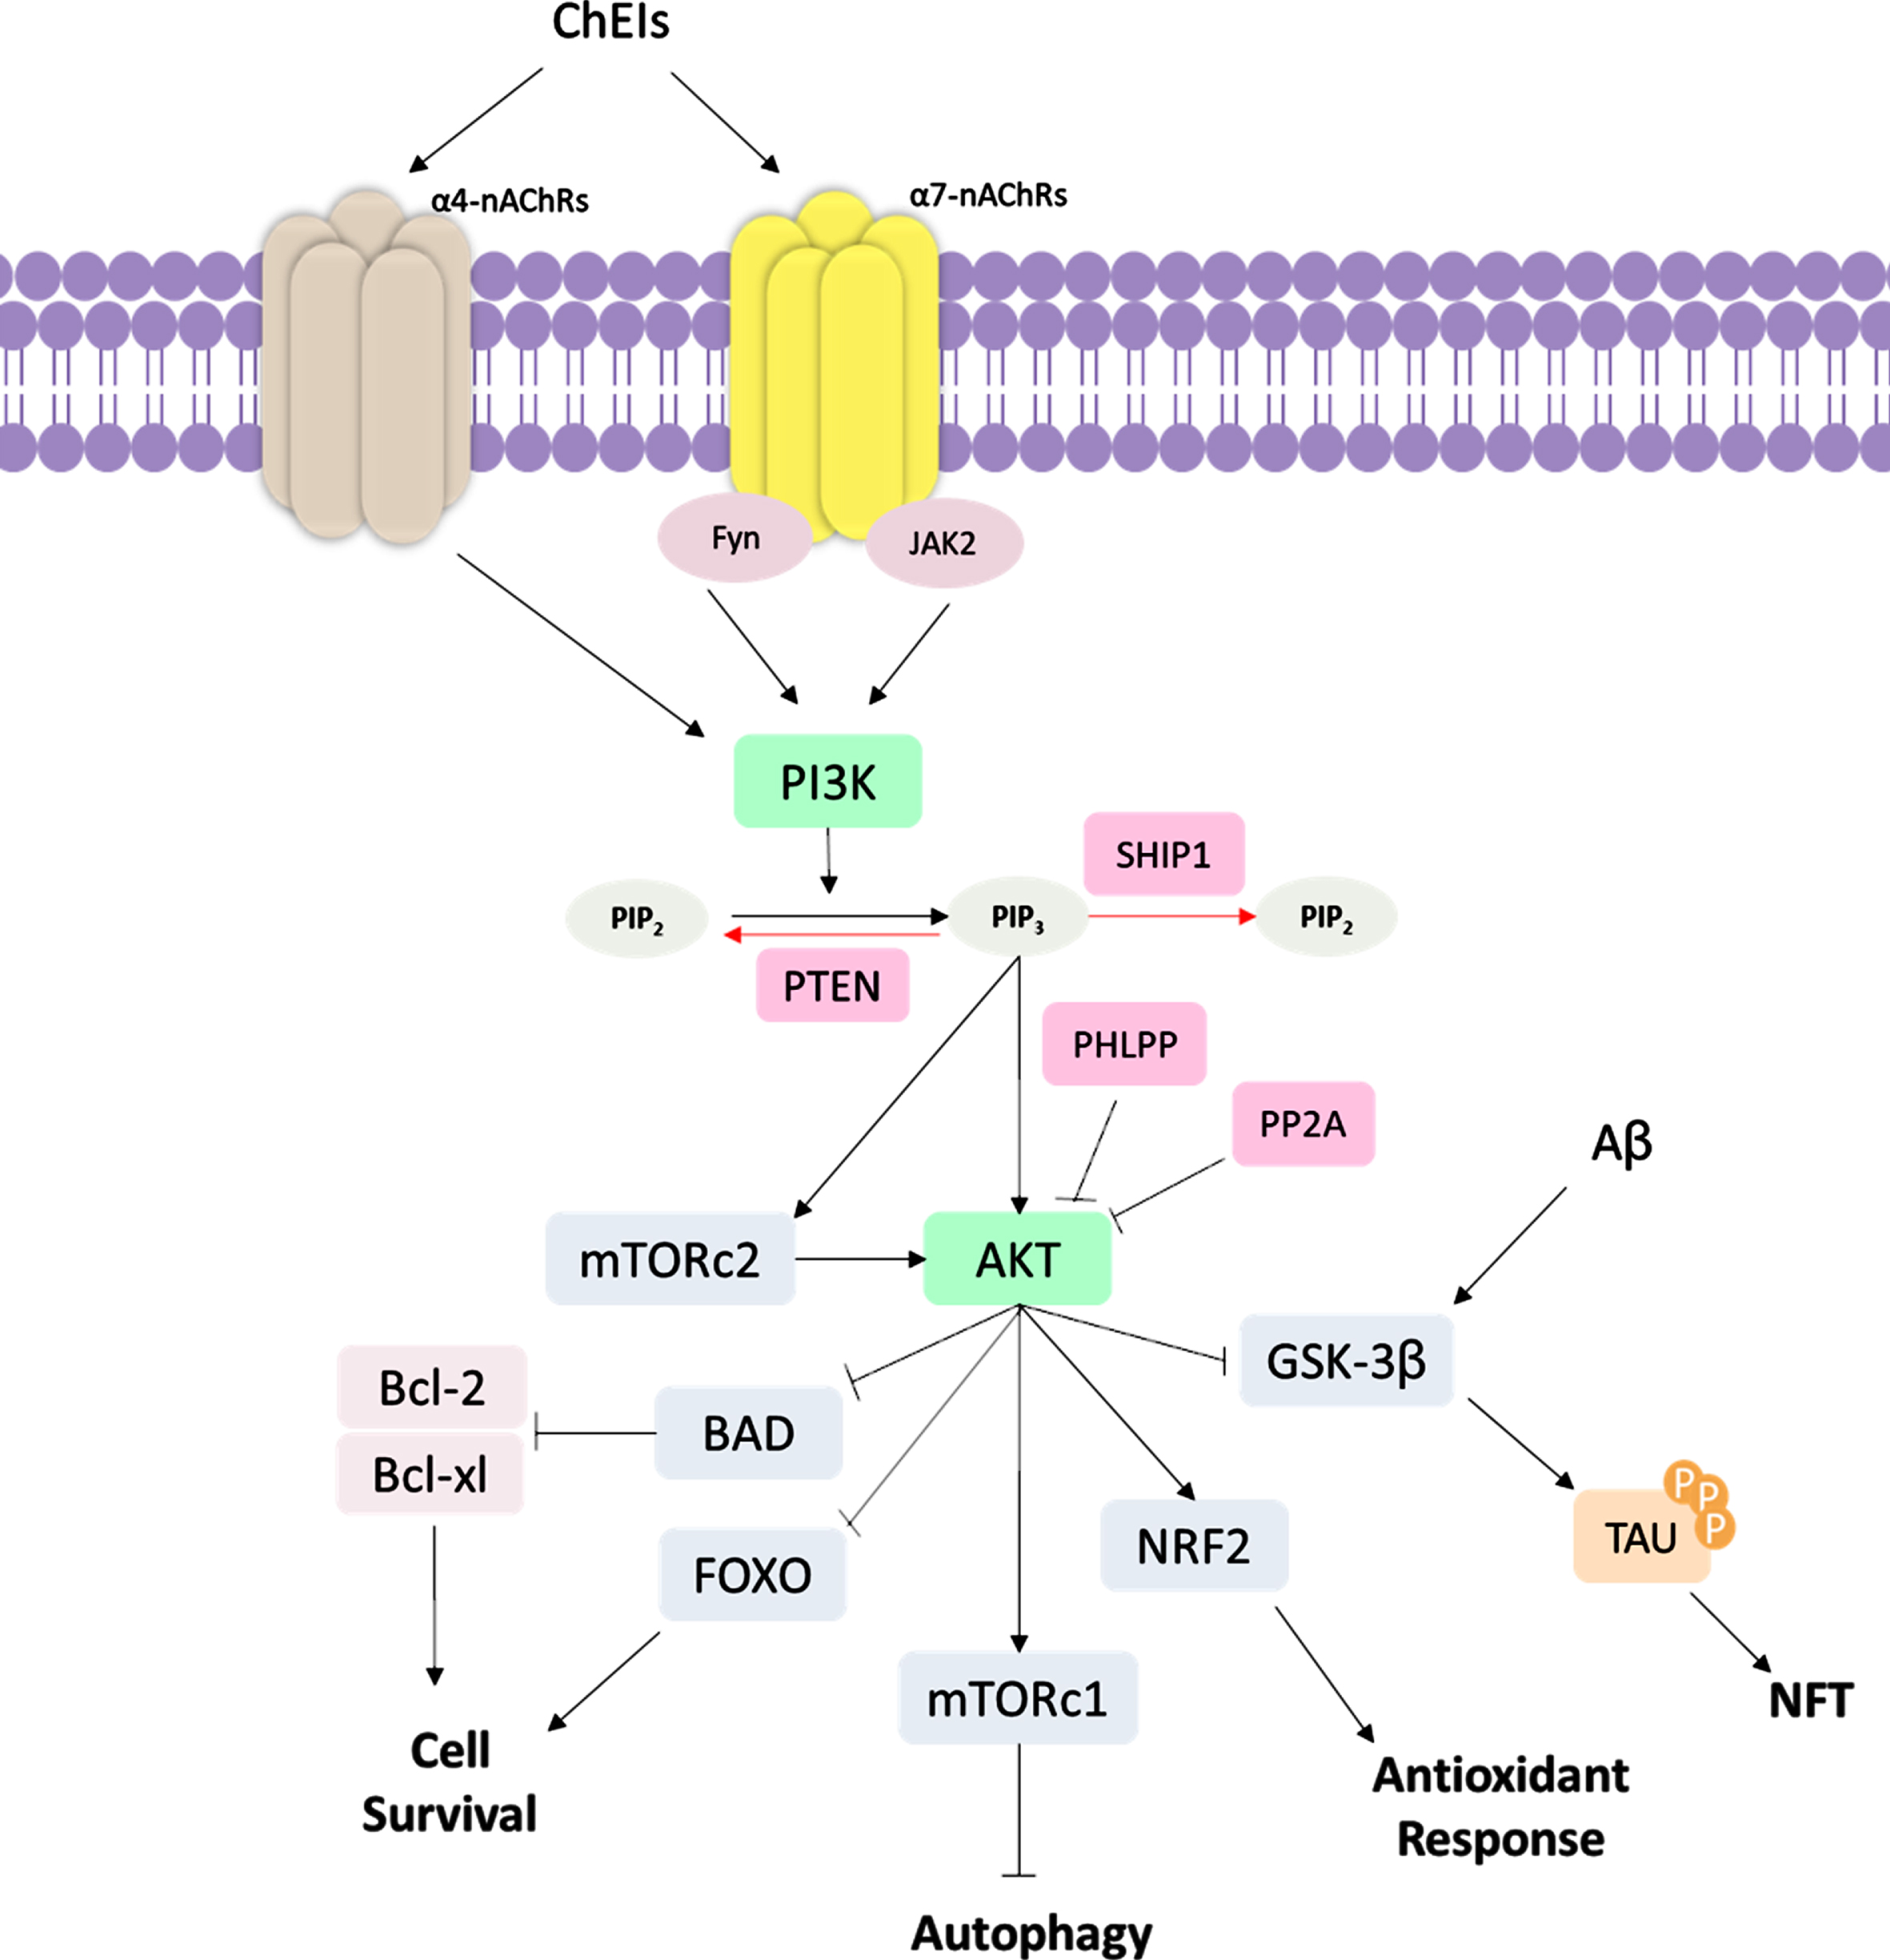 Schematic representation of PI3K/AKT signaling pathway ChEI binding leads to the stimulation of α4 and α7 nicotinic acetylcholine receptors (nAChRs); subsequently, occurs the activation of tyrosine kinase Fyn and Janus-activated kinase 2 (JAK2), leading to the activation of phosphatidylinositol-4,5-bisphosphate 3-kinase (PI3K). PI3K converts phosphatidylinositol (3,4)-bisphosphate (PIP2) into phosphatidylinositol (3,4,5)-trisphosphate (PIP3), which activates protein kinase B (AKT). mTOR Complex 2 (mTORC2) also activate AKT signaling. PI3K/AKT pathway regulates several cellular functions, such as inhibition of Glycogen synthase kinase-3β (GSK-3β) that affects tau hyperphosphorylation, inhibition of Forkhead box O (FOXO) and Bcl-2-associated death promoter (BAD) proteins, which are cell survival regulators, such as B-cell lymphoma 2 (Bcl-2) and Bcl-2, and B-cell lymphoma-extra large (Bcl-xL). AKT also activates the mTOR Complex 1 (mTORc1) autophagy regulator and NRF2, which promotes antioxidant response. In AD, the Aβ also acts by inducing GSK-3β activity, increased NFT formation. The PI3K/AKT signaling pathway can be regulated in several ways. The Phosphatase and tensin homolog (PTEN) protein and Src homology domain-containing inositol 5′-phosphatase 1 (SHIP1) induce the dephosphorylation of PIP3 into PIP2, being negative regulators of PI3K/AKT signaling. PH domain and leucine-rich repeat protein phosphatase (PHLPP) and protein phosphatase 2A (PP2A) are also downregulators of AKT protein.